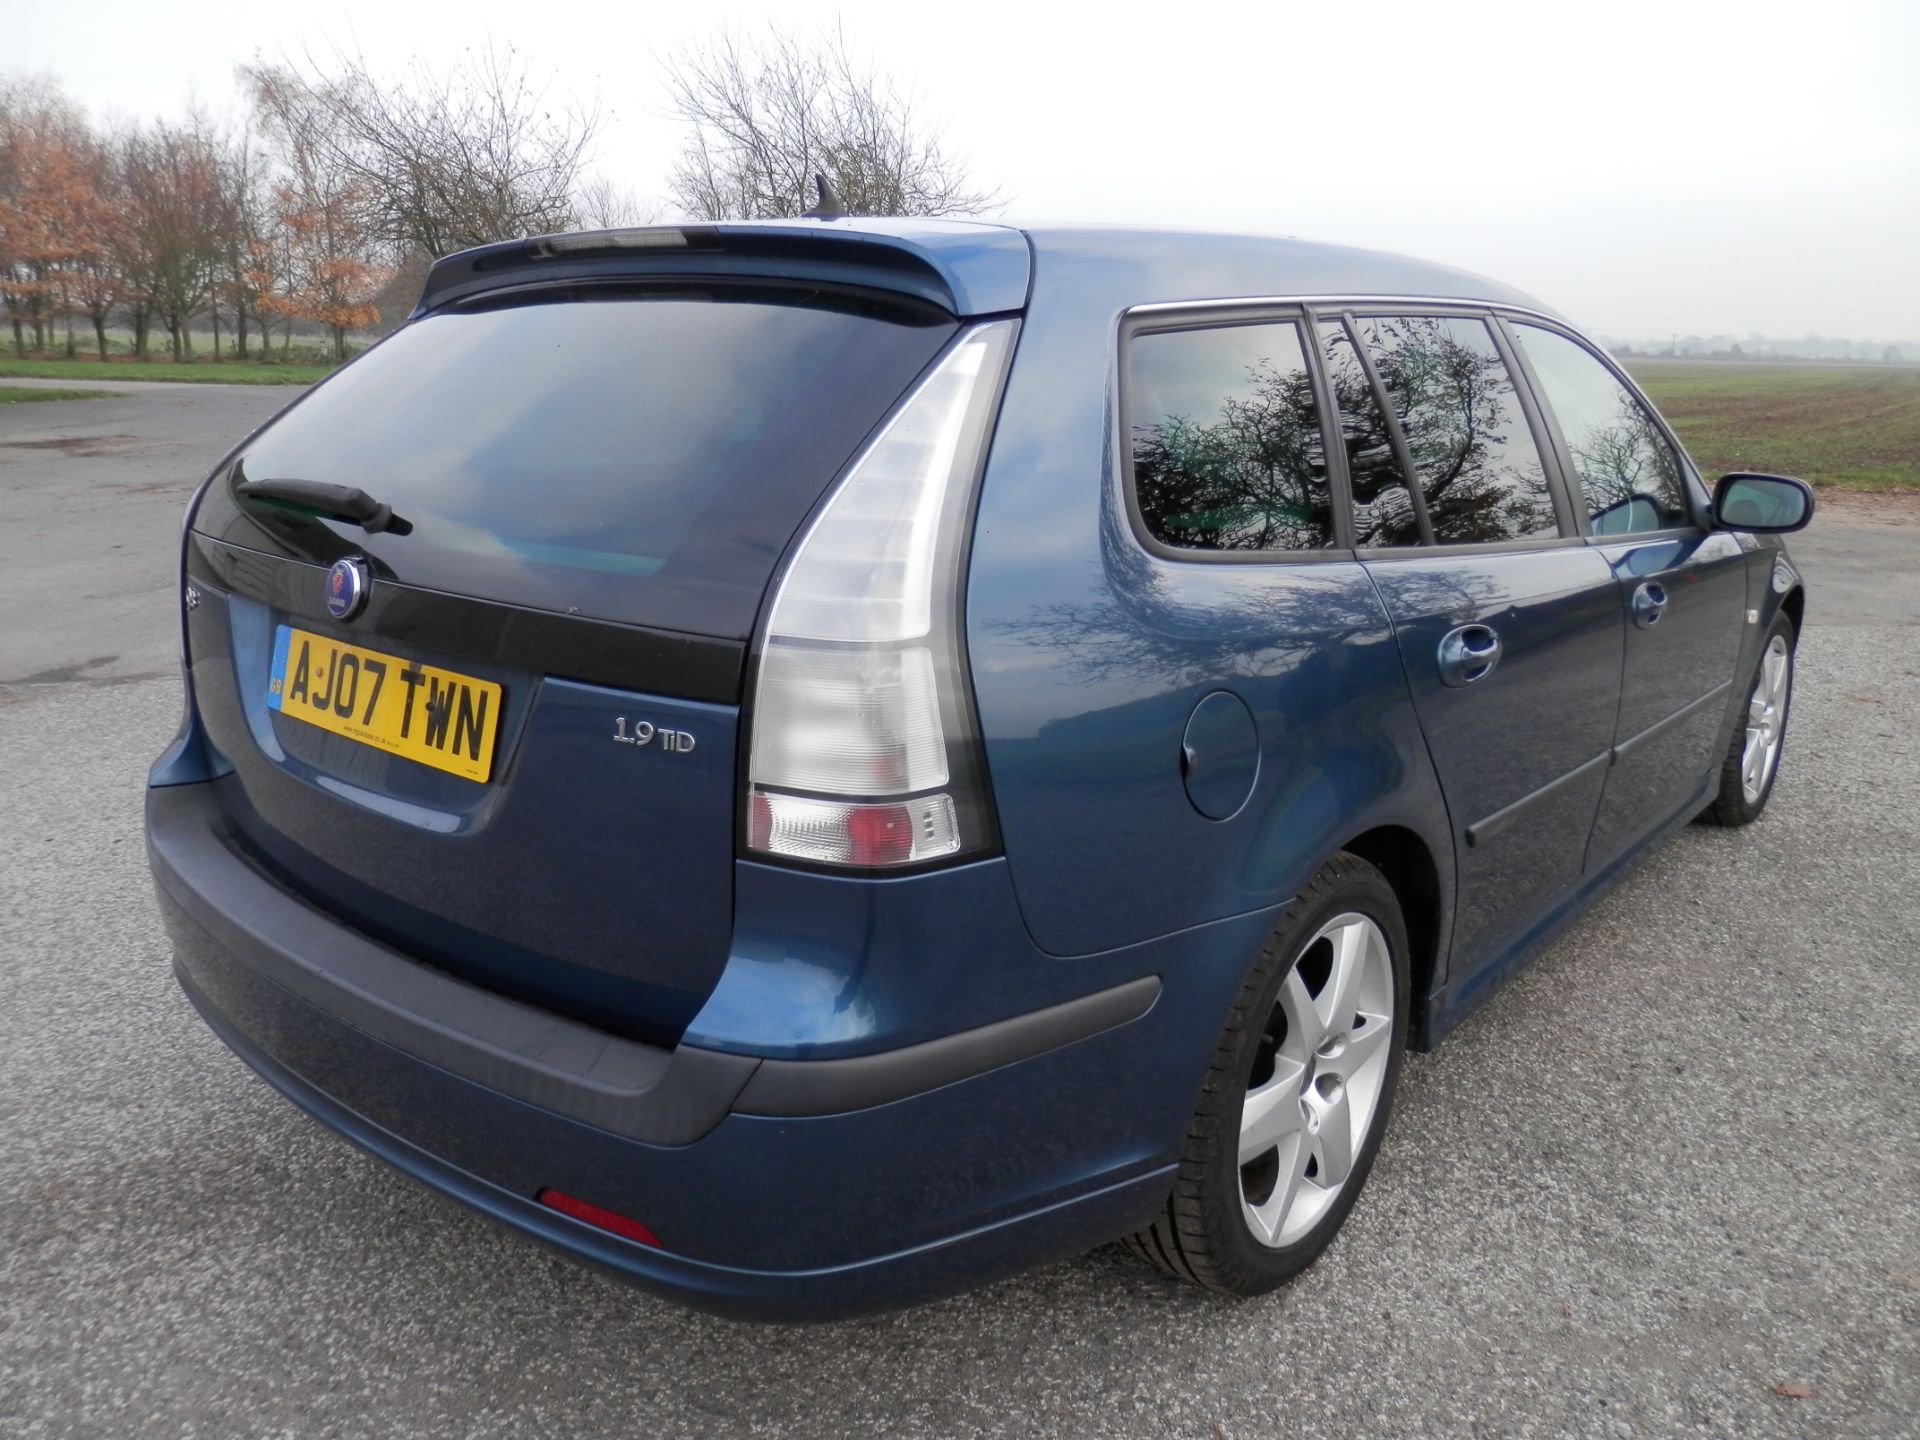 NOW WITH NO RESERVE !! 2007/07 SAAB 93 SPORTWAGON 1.9 TID 120 BHP, 6 SPEED MANUAL, MOT MARCH 2007. - Image 2 of 25